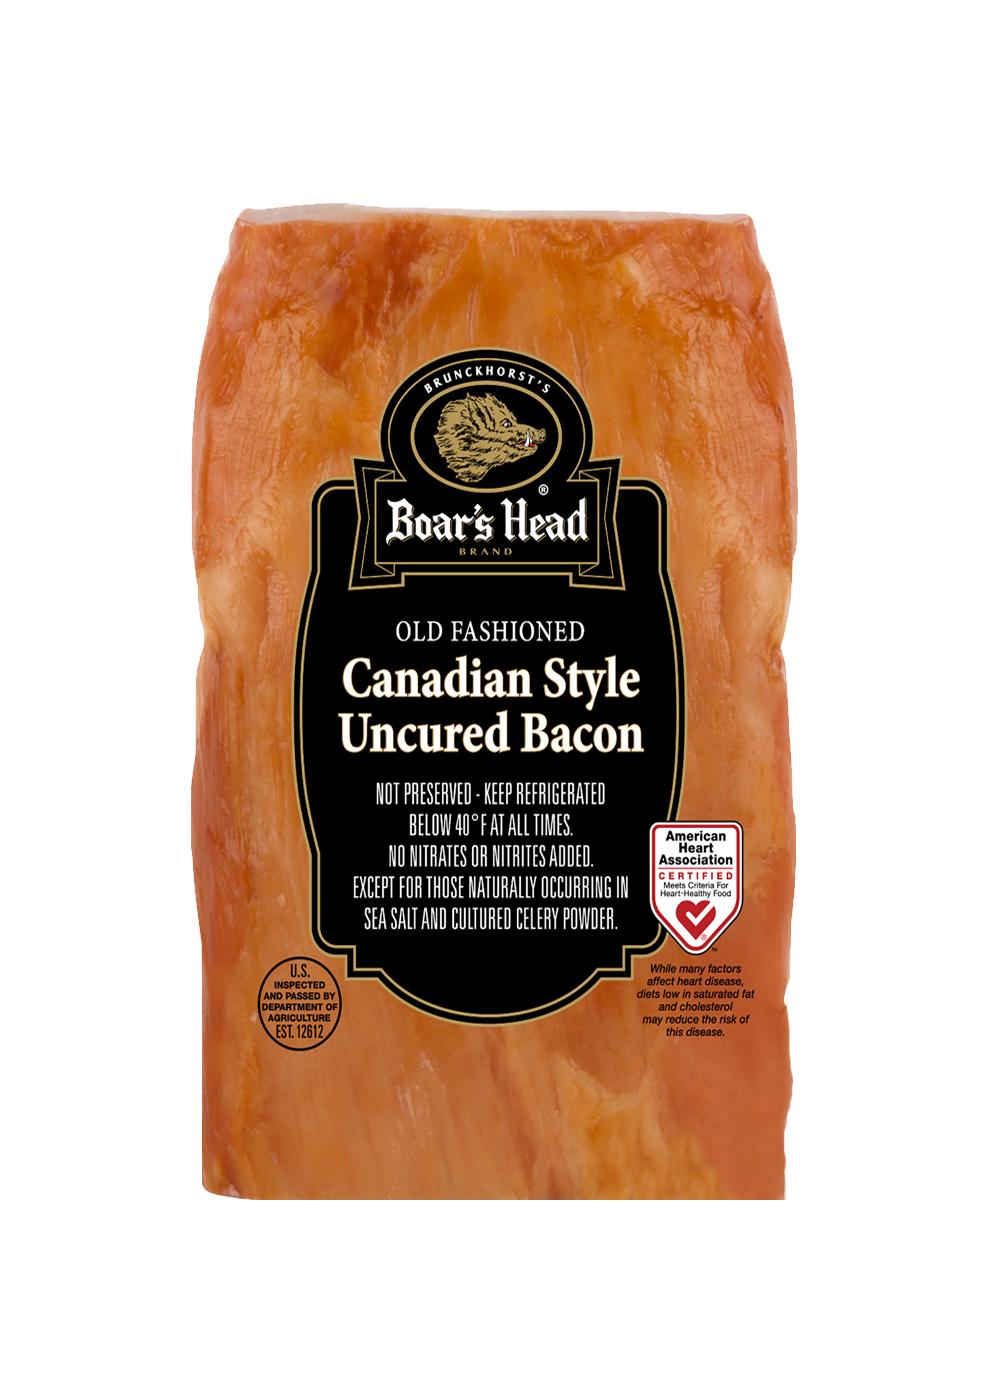 Boar's Head Old Fashioned Canadian Style Uncured Bacon; image 1 of 2